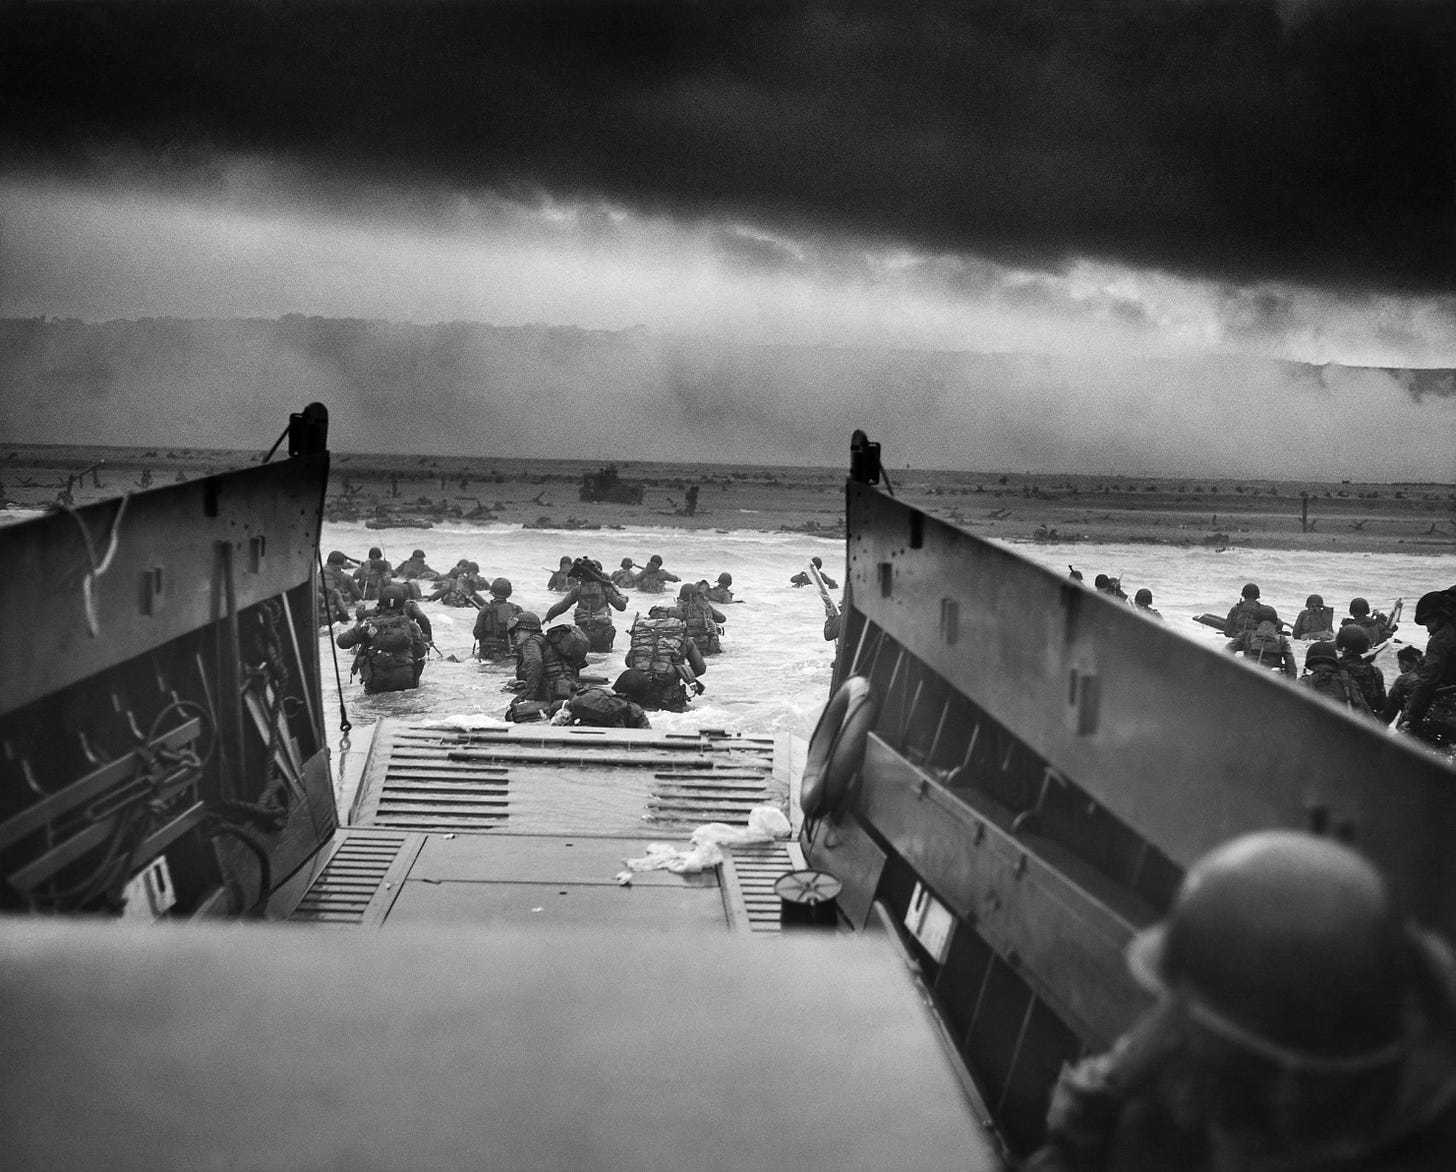 https://upload.wikimedia.org/wikipedia/commons/a/a5/Into_the_Jaws_of_Death_23-0455M_edit.jpg Into the Jaws of Death: Troops from the U.S. 1st Infantry Division landing on Omaha, as photographed by Robert F. Sargent